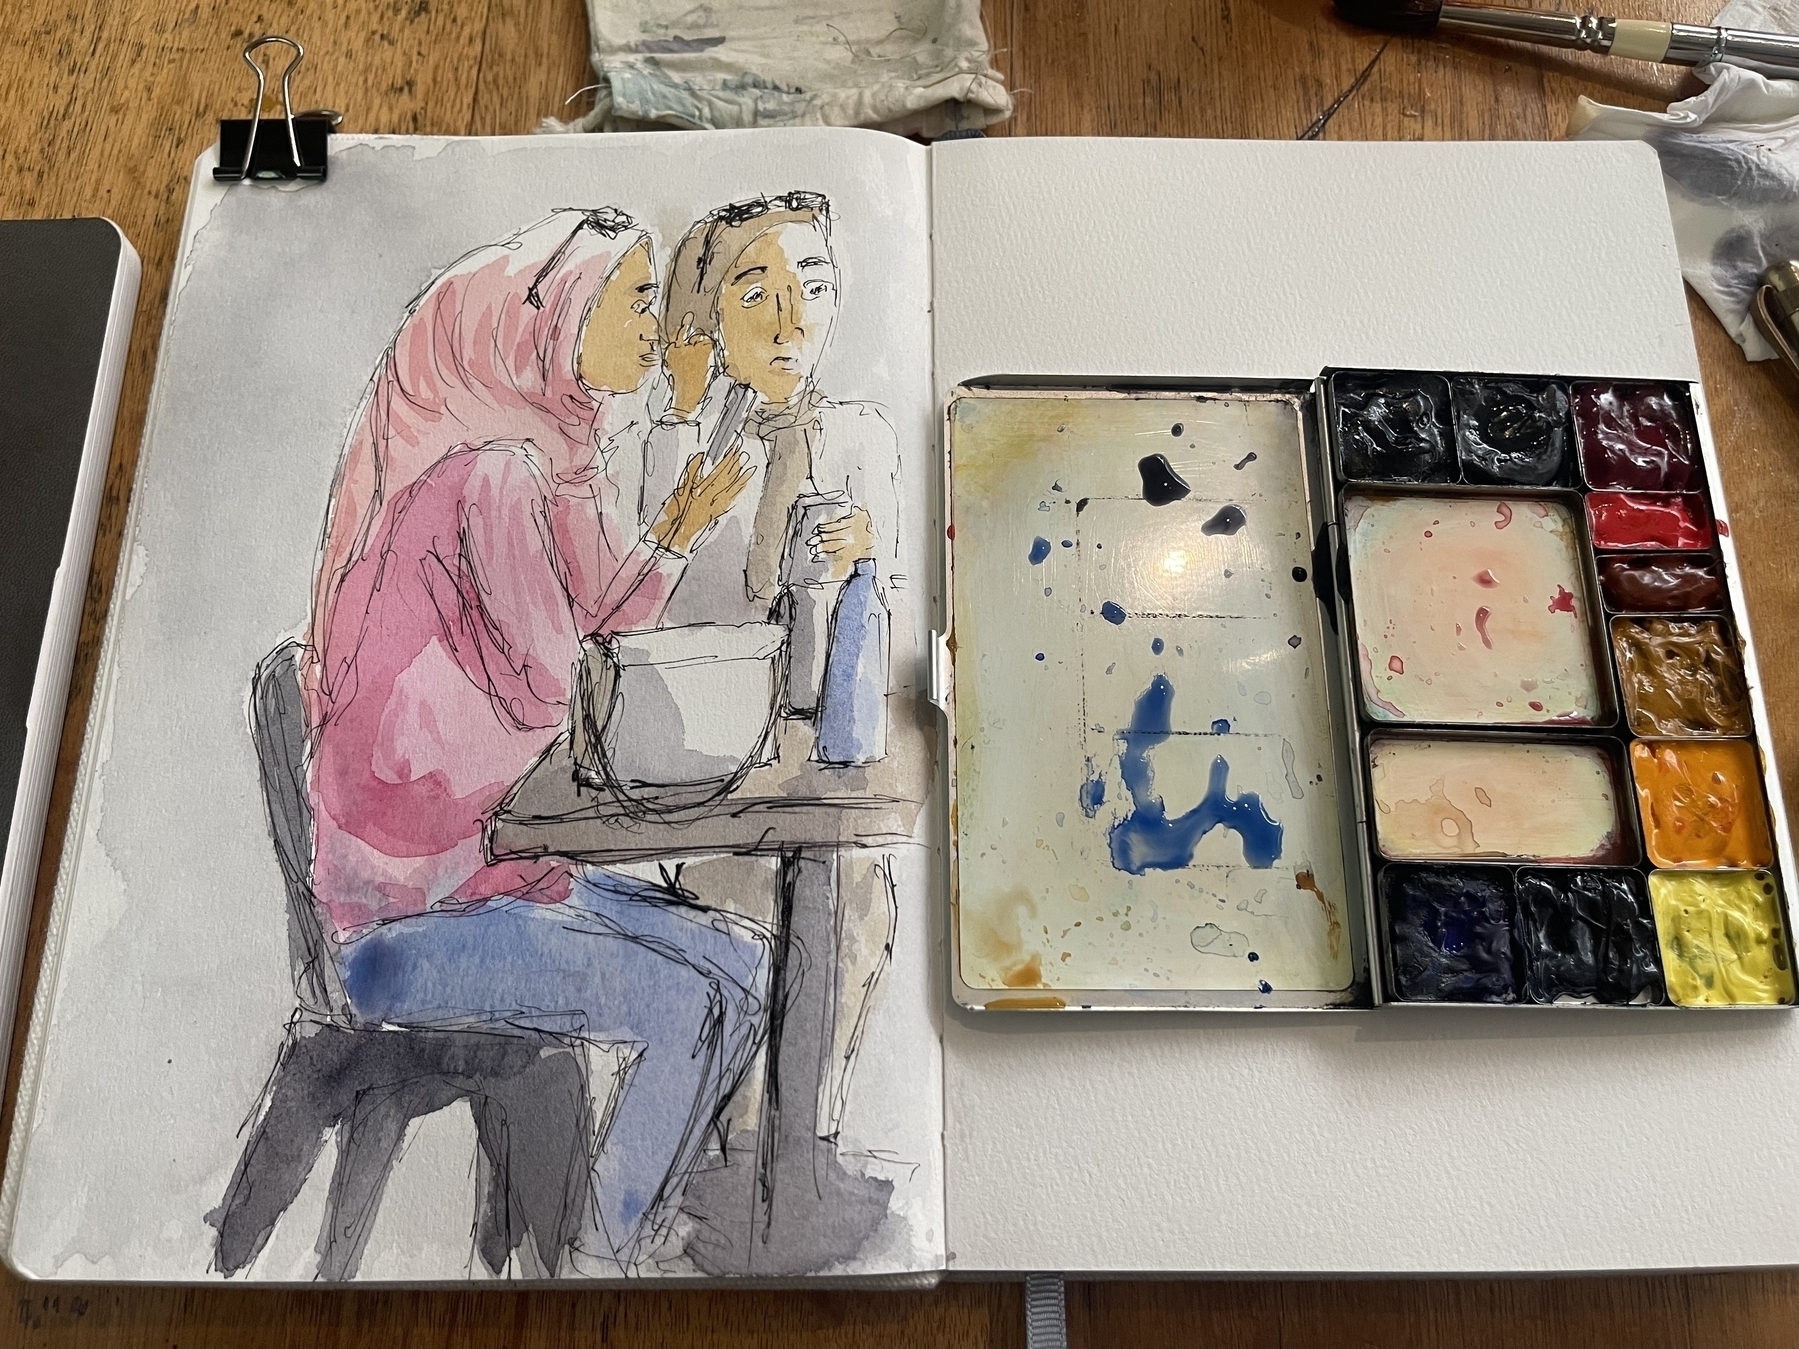 A watercolour painting of two women on their phones